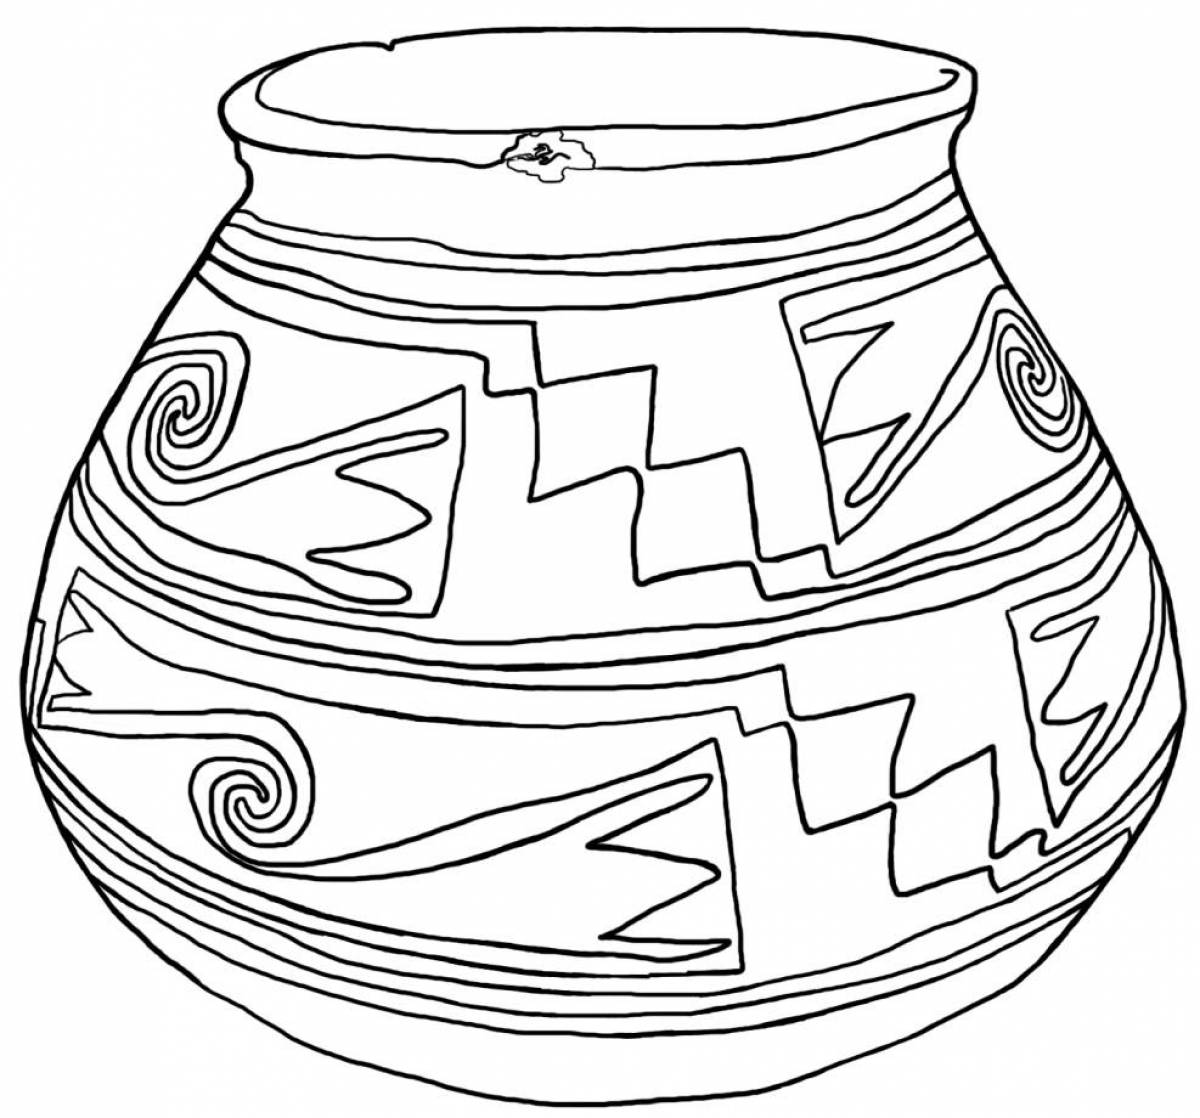 Pot with ornament